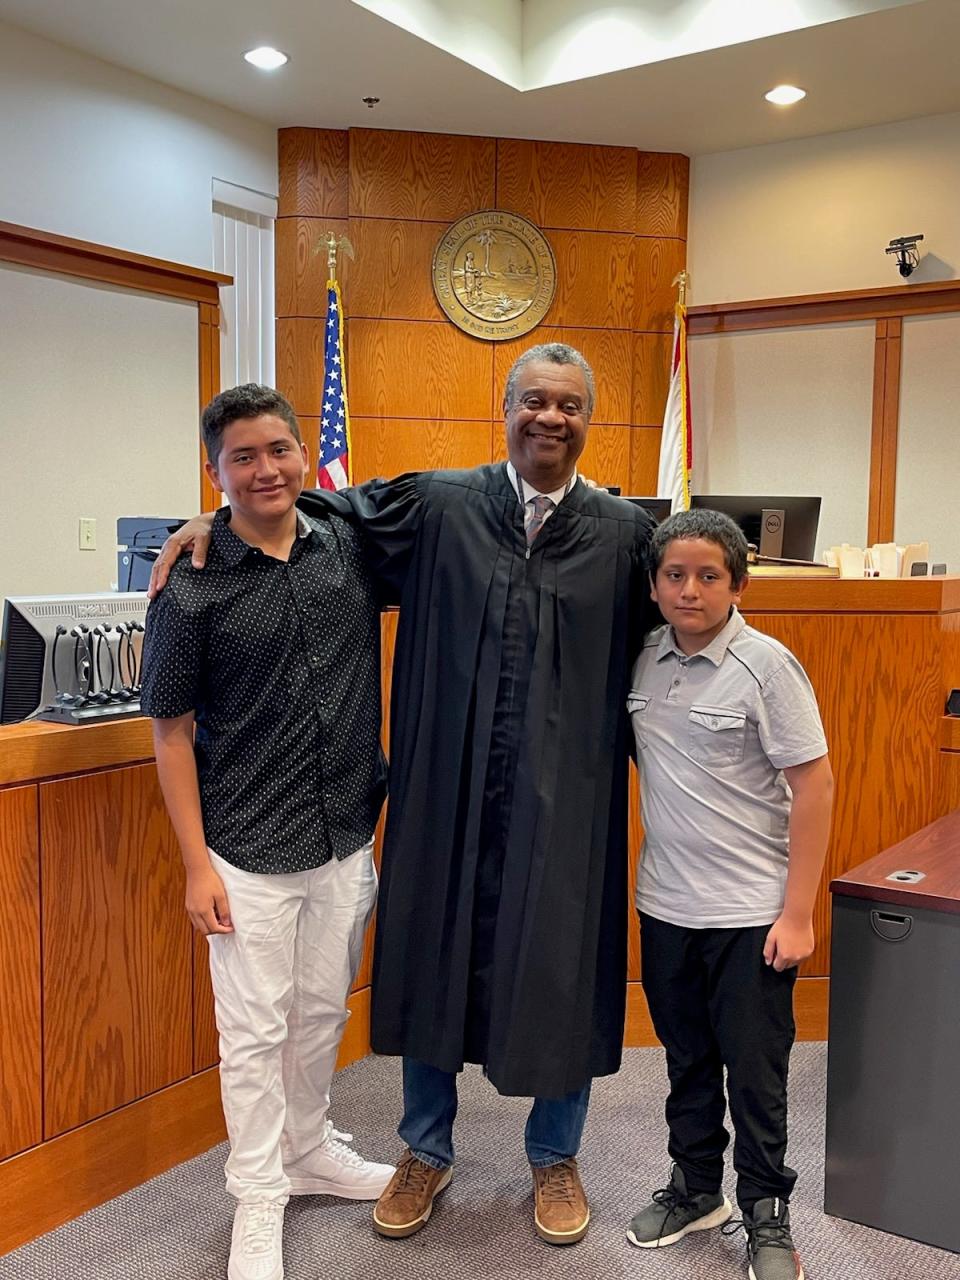 Mentees Diego and Alfonzo with Judge Charles Williams